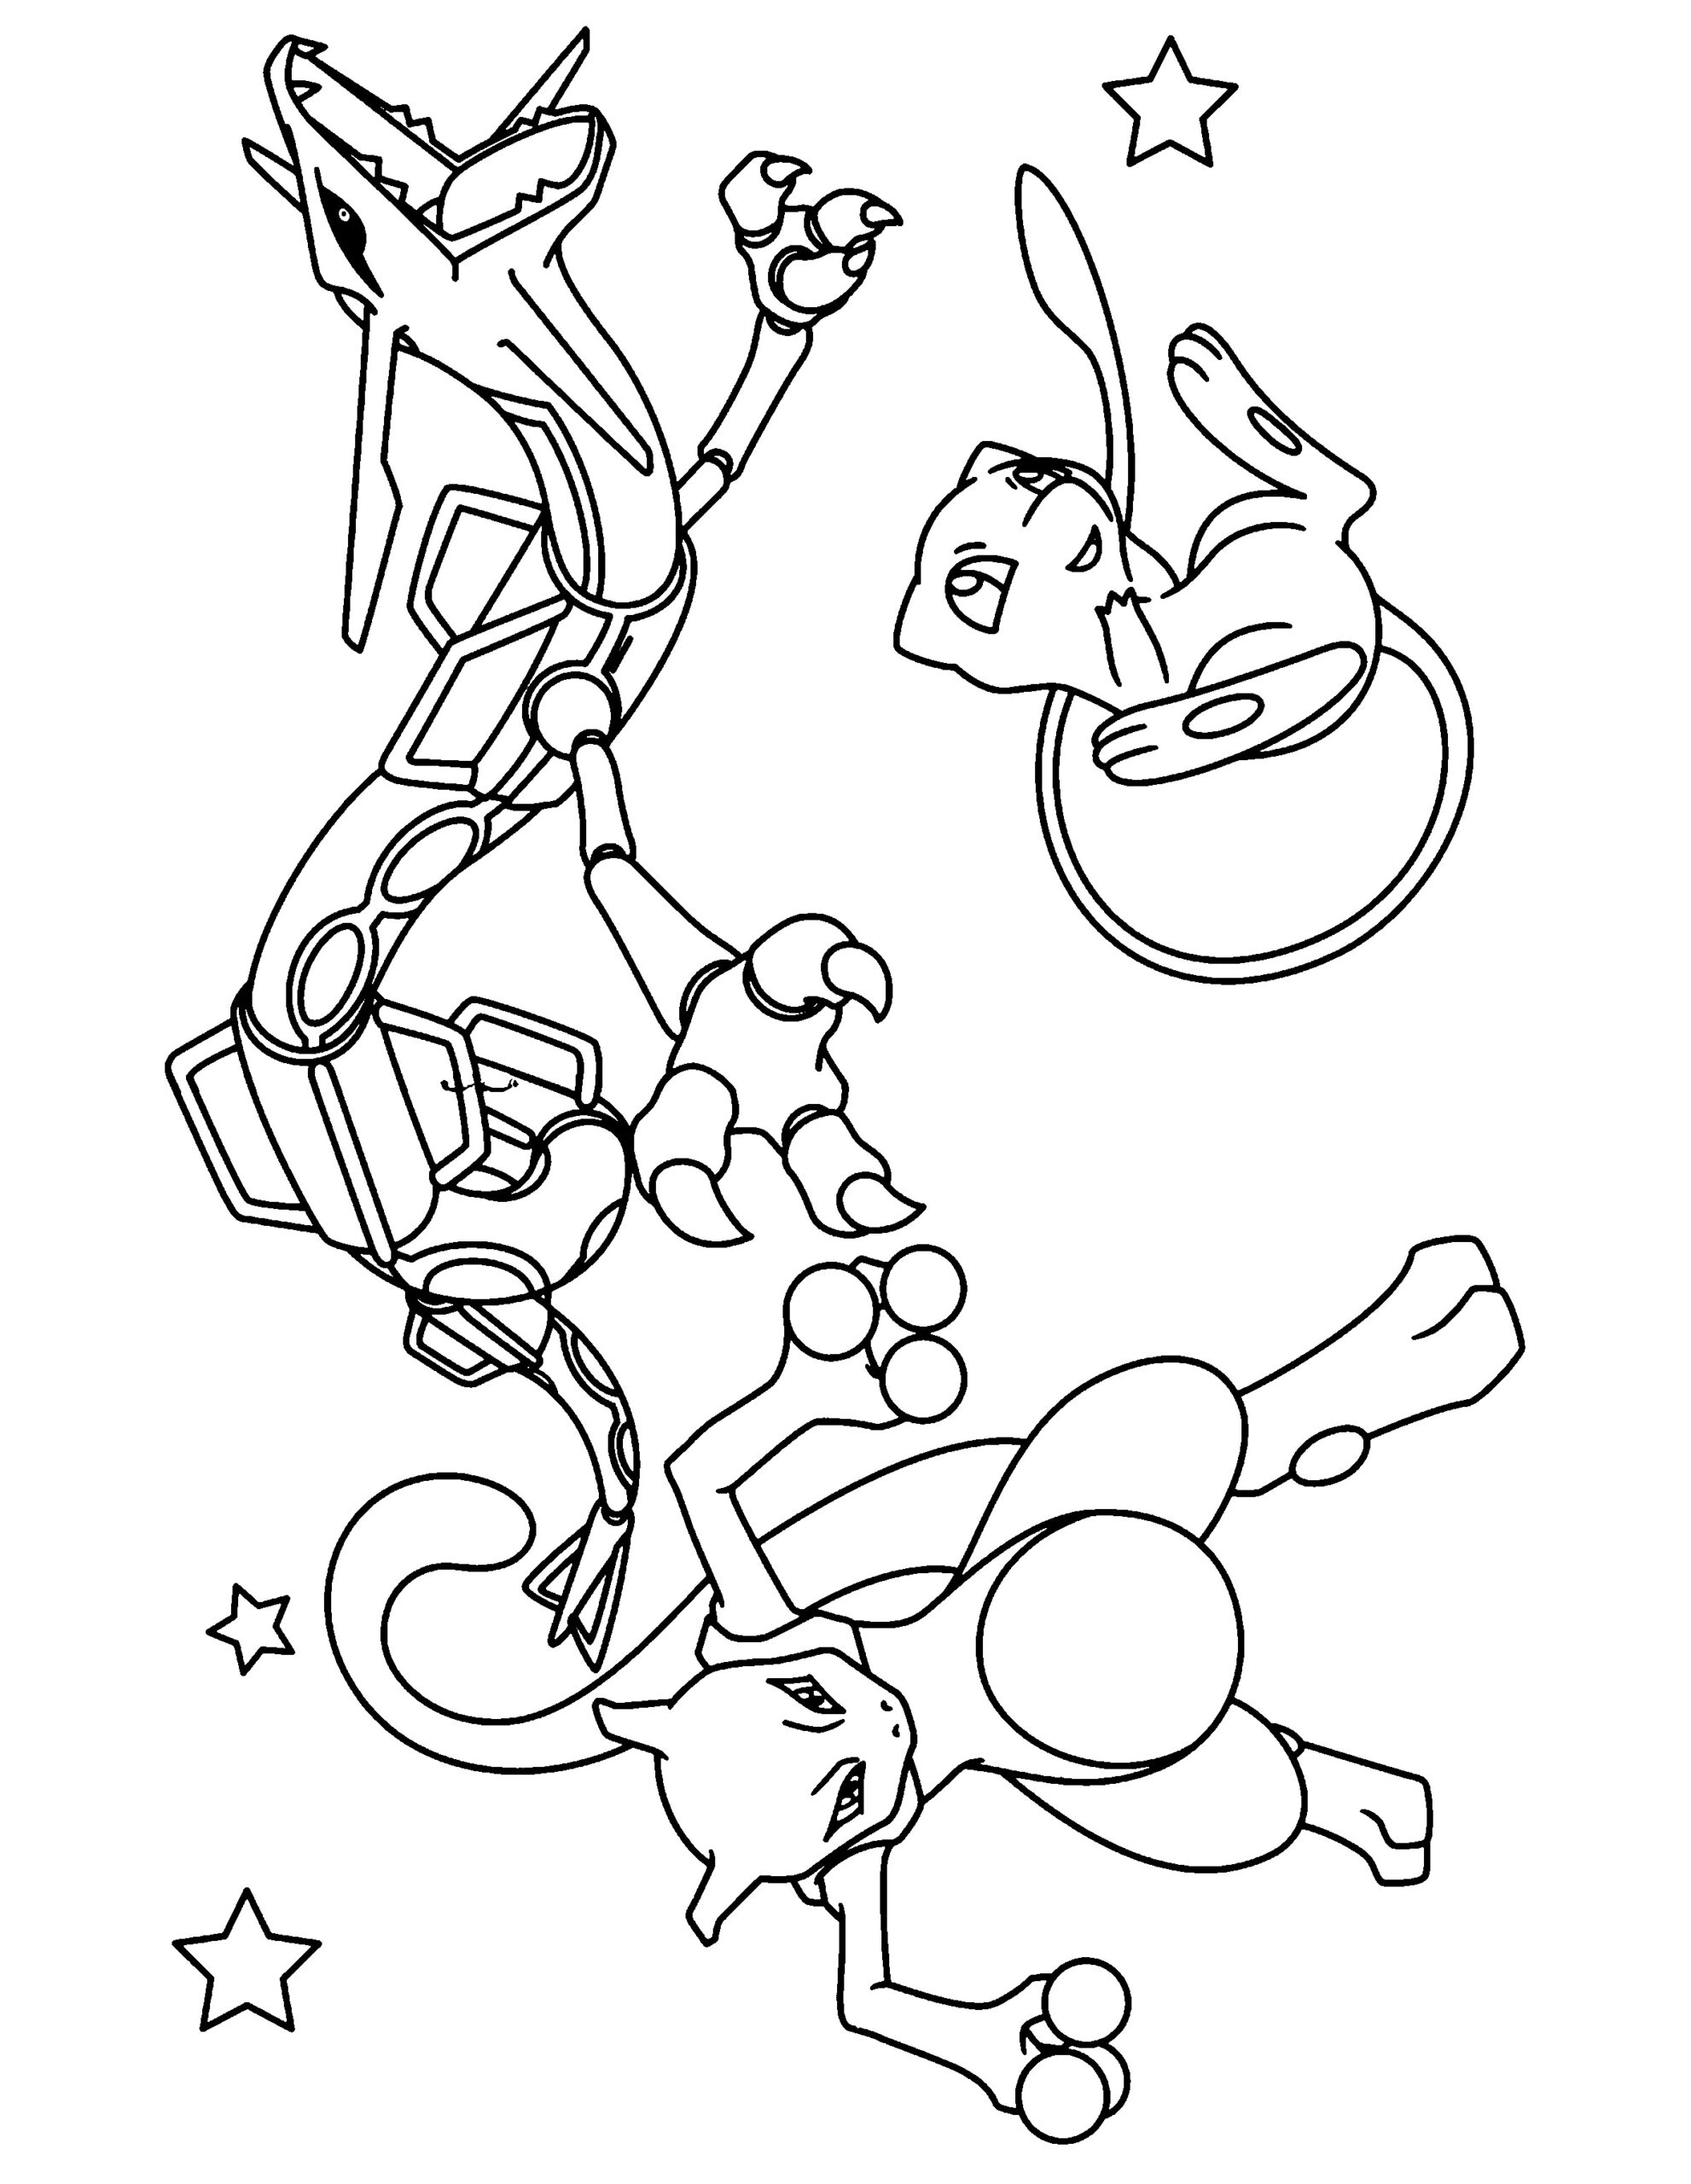 Mew Coloring Pages At Getcolorings | Free Printable Colorings Pages serapportantà Dessin Pokémon Mew